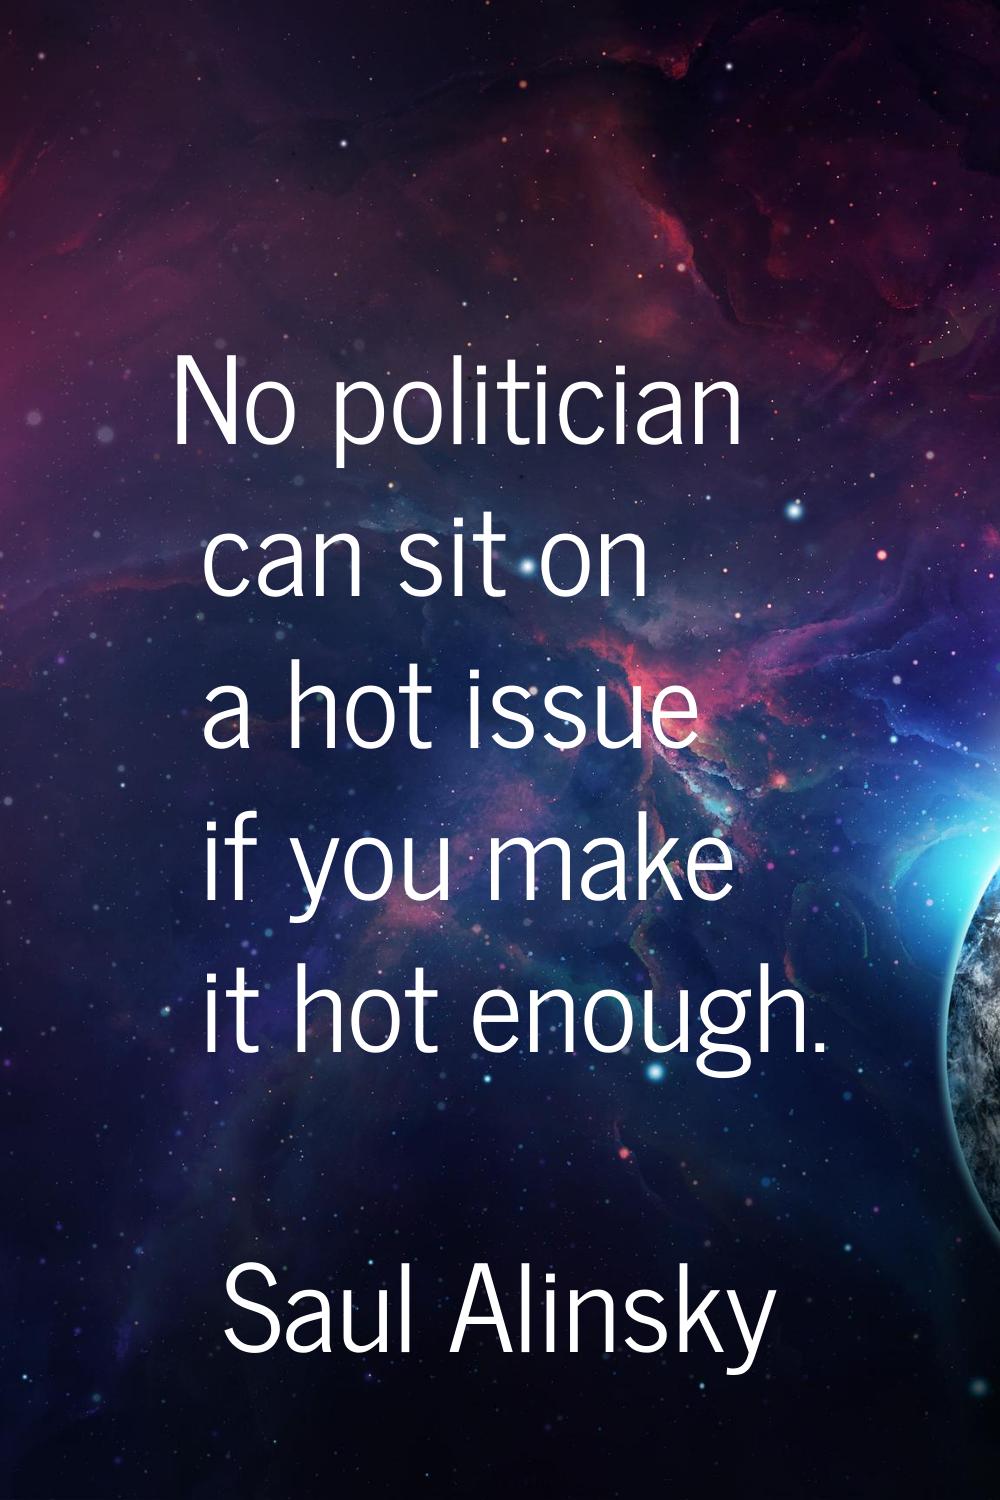 No politician can sit on a hot issue if you make it hot enough.